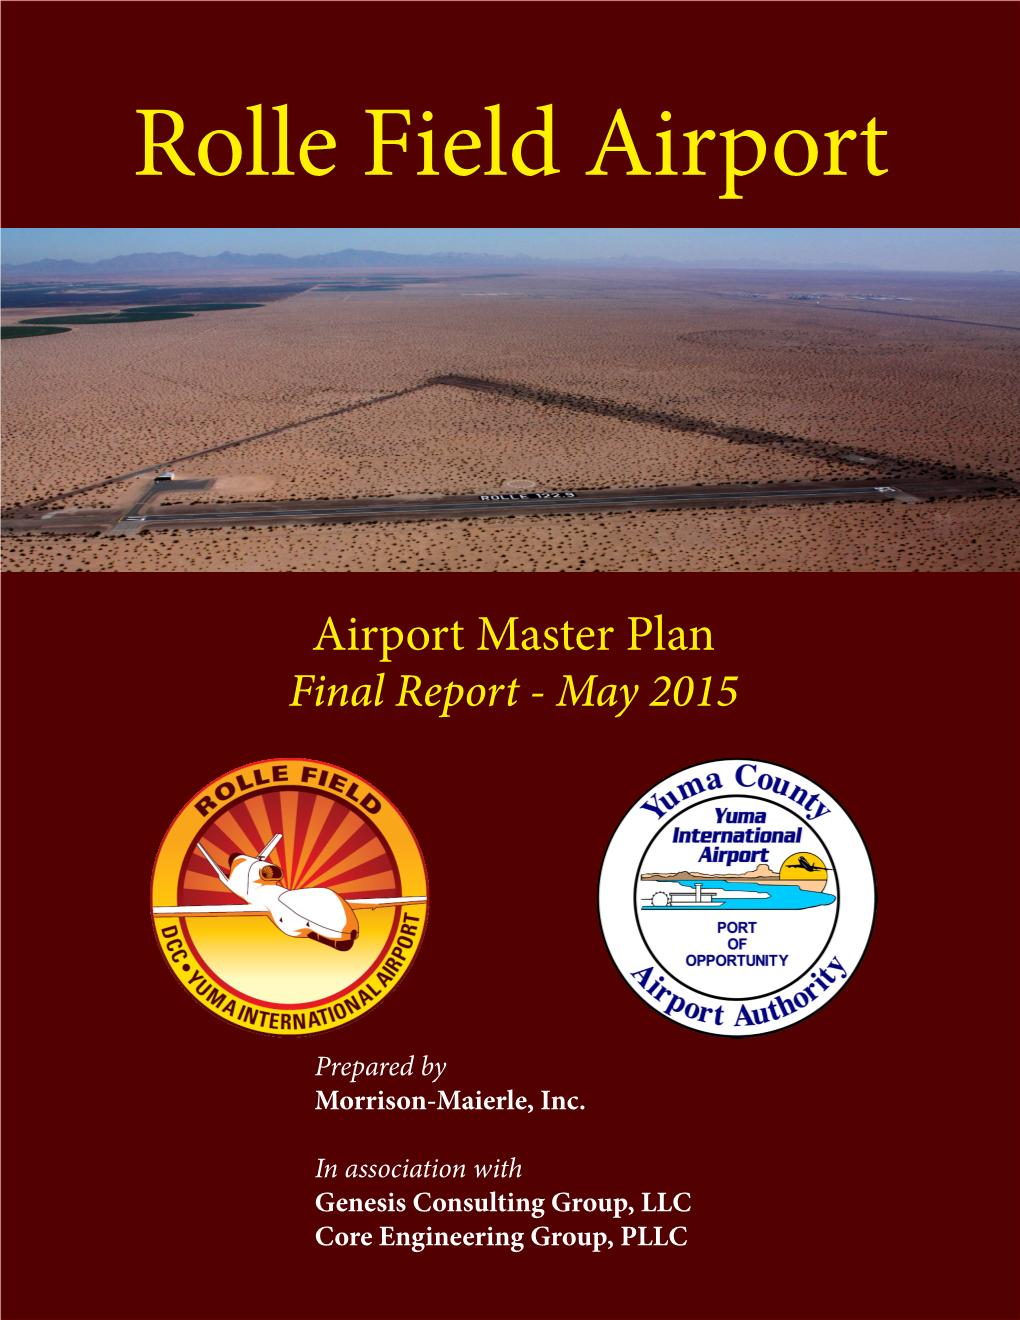 Rolle Field Airport Master Plan